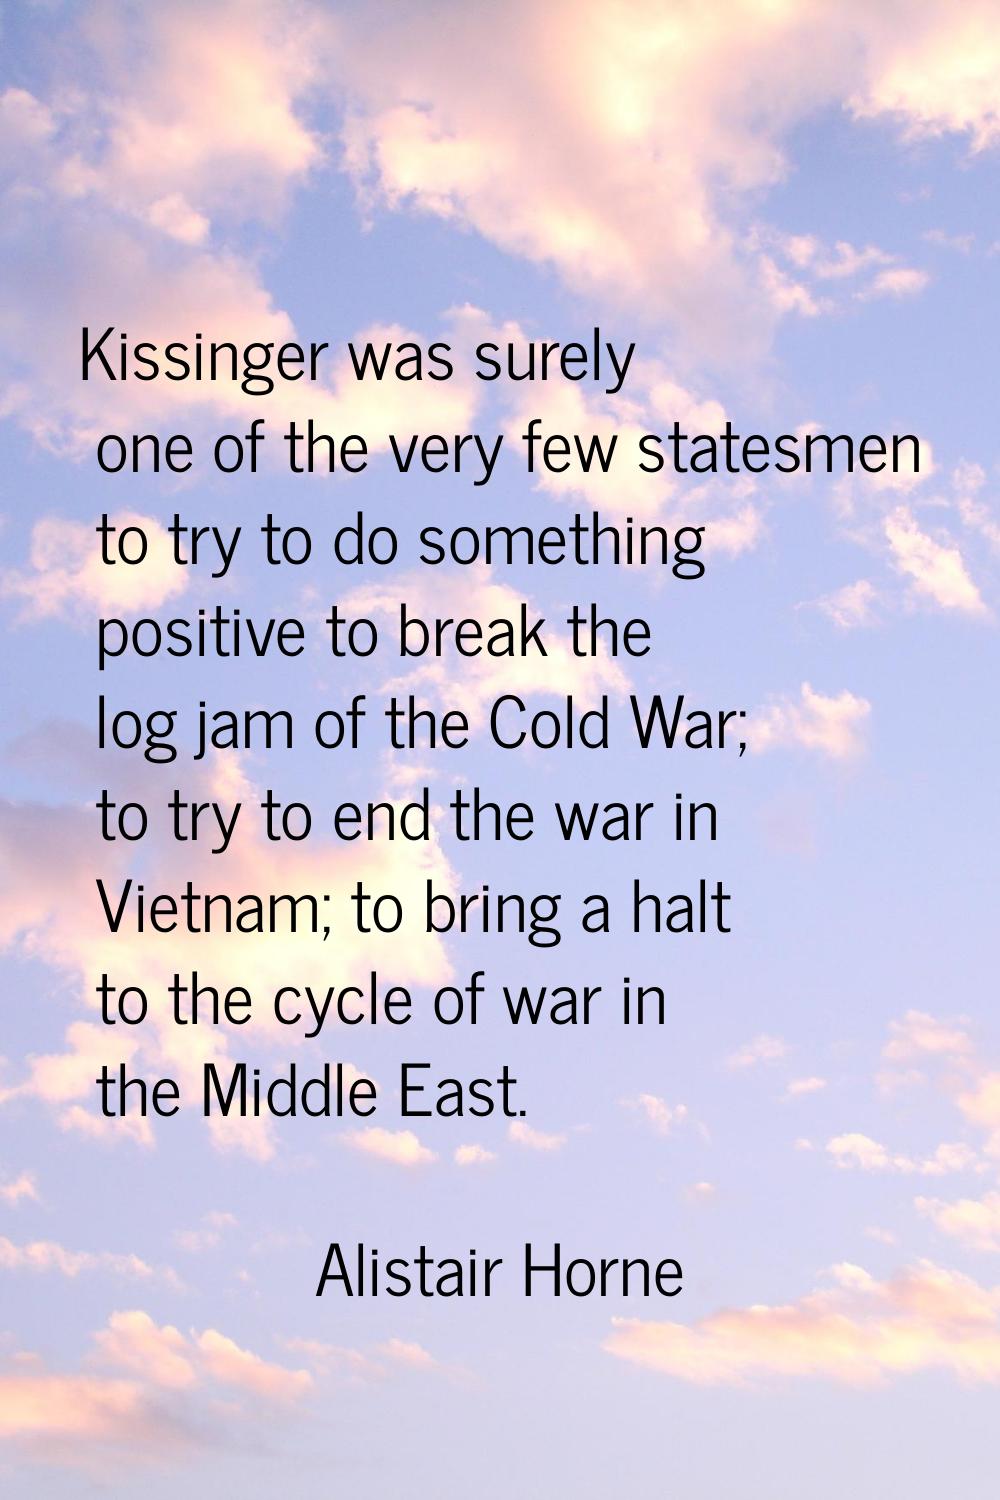 Kissinger was surely one of the very few statesmen to try to do something positive to break the log